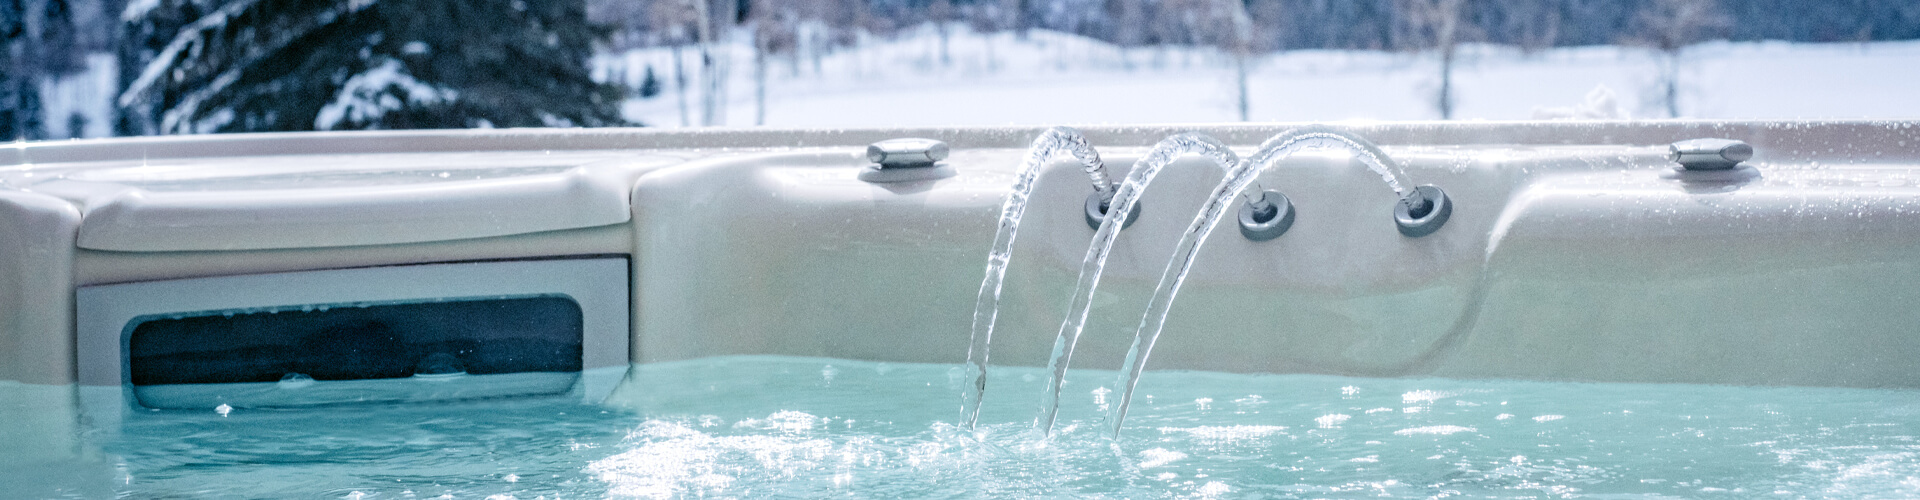 Best Products For Keeping Your Hot Tub Crystal Clear